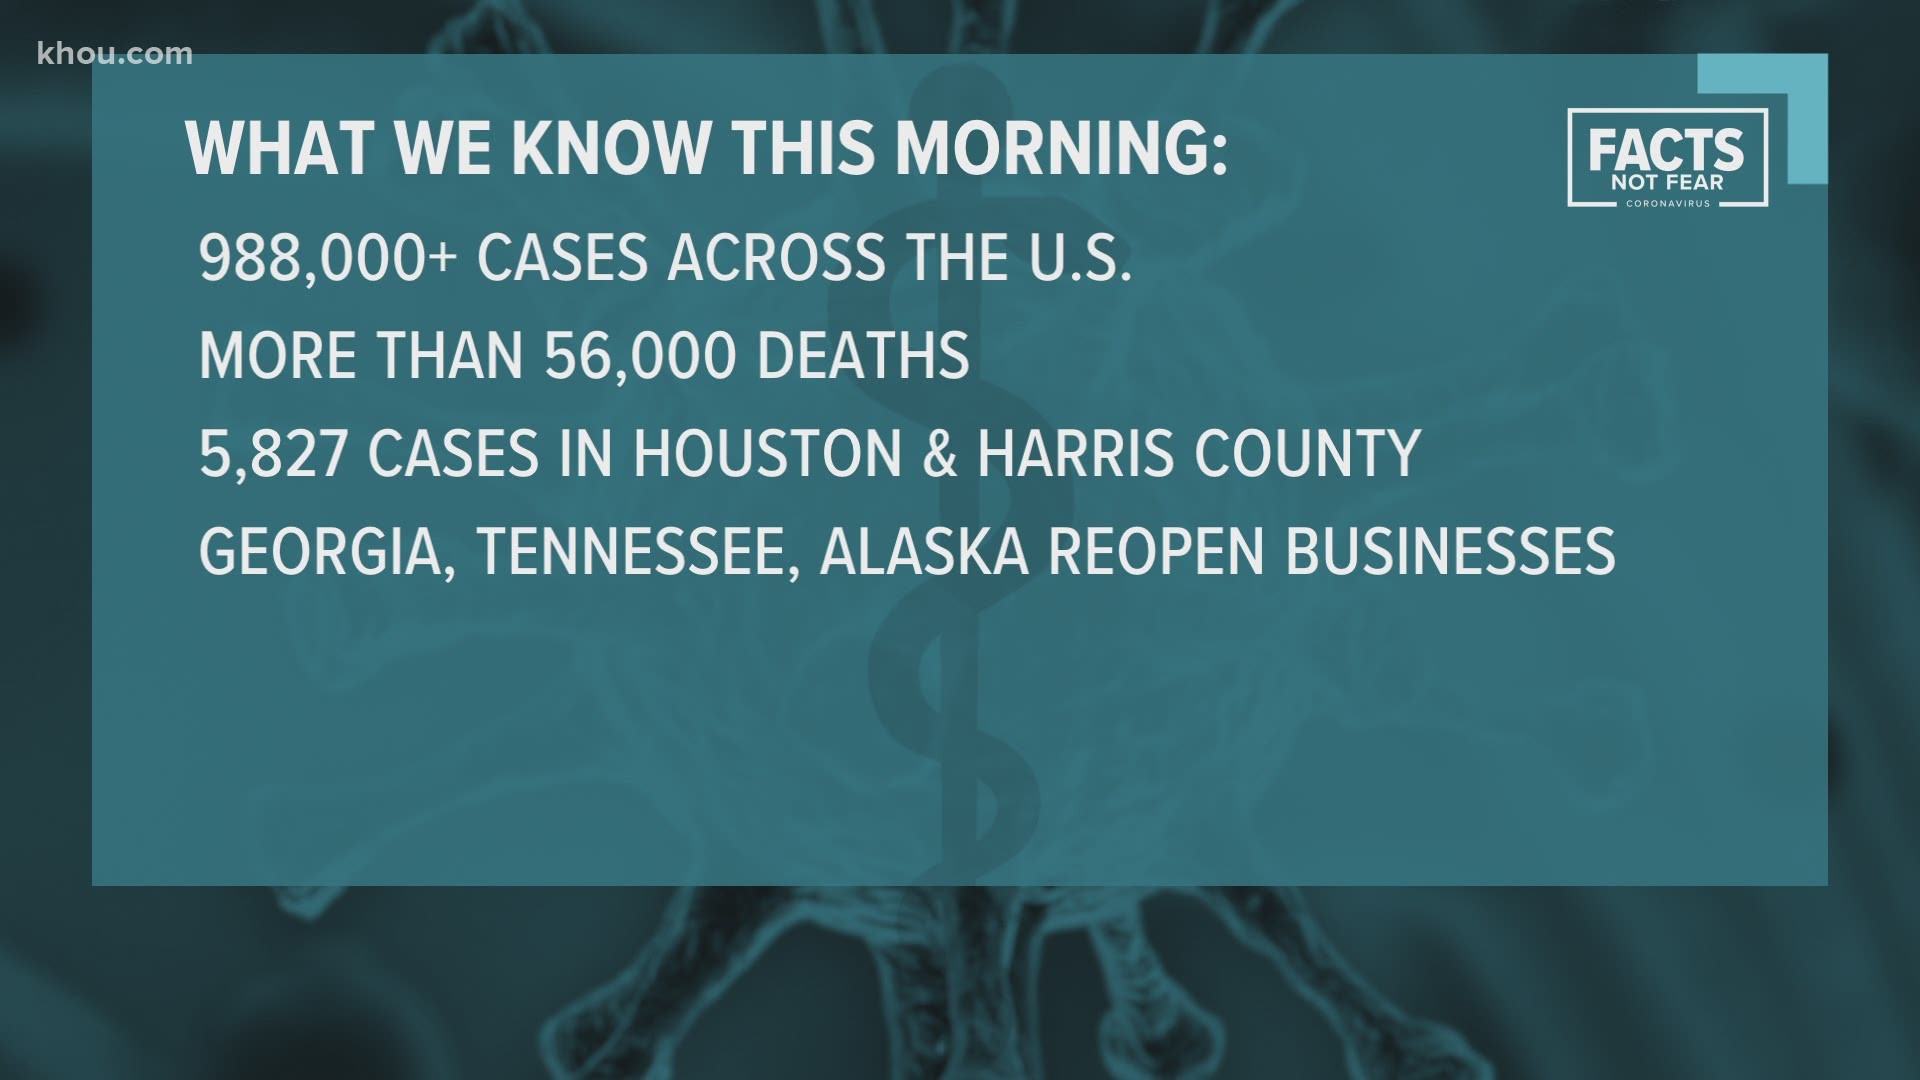 Here are today's local and national coronavirus headlines for Tuesday, April 28, 2020.